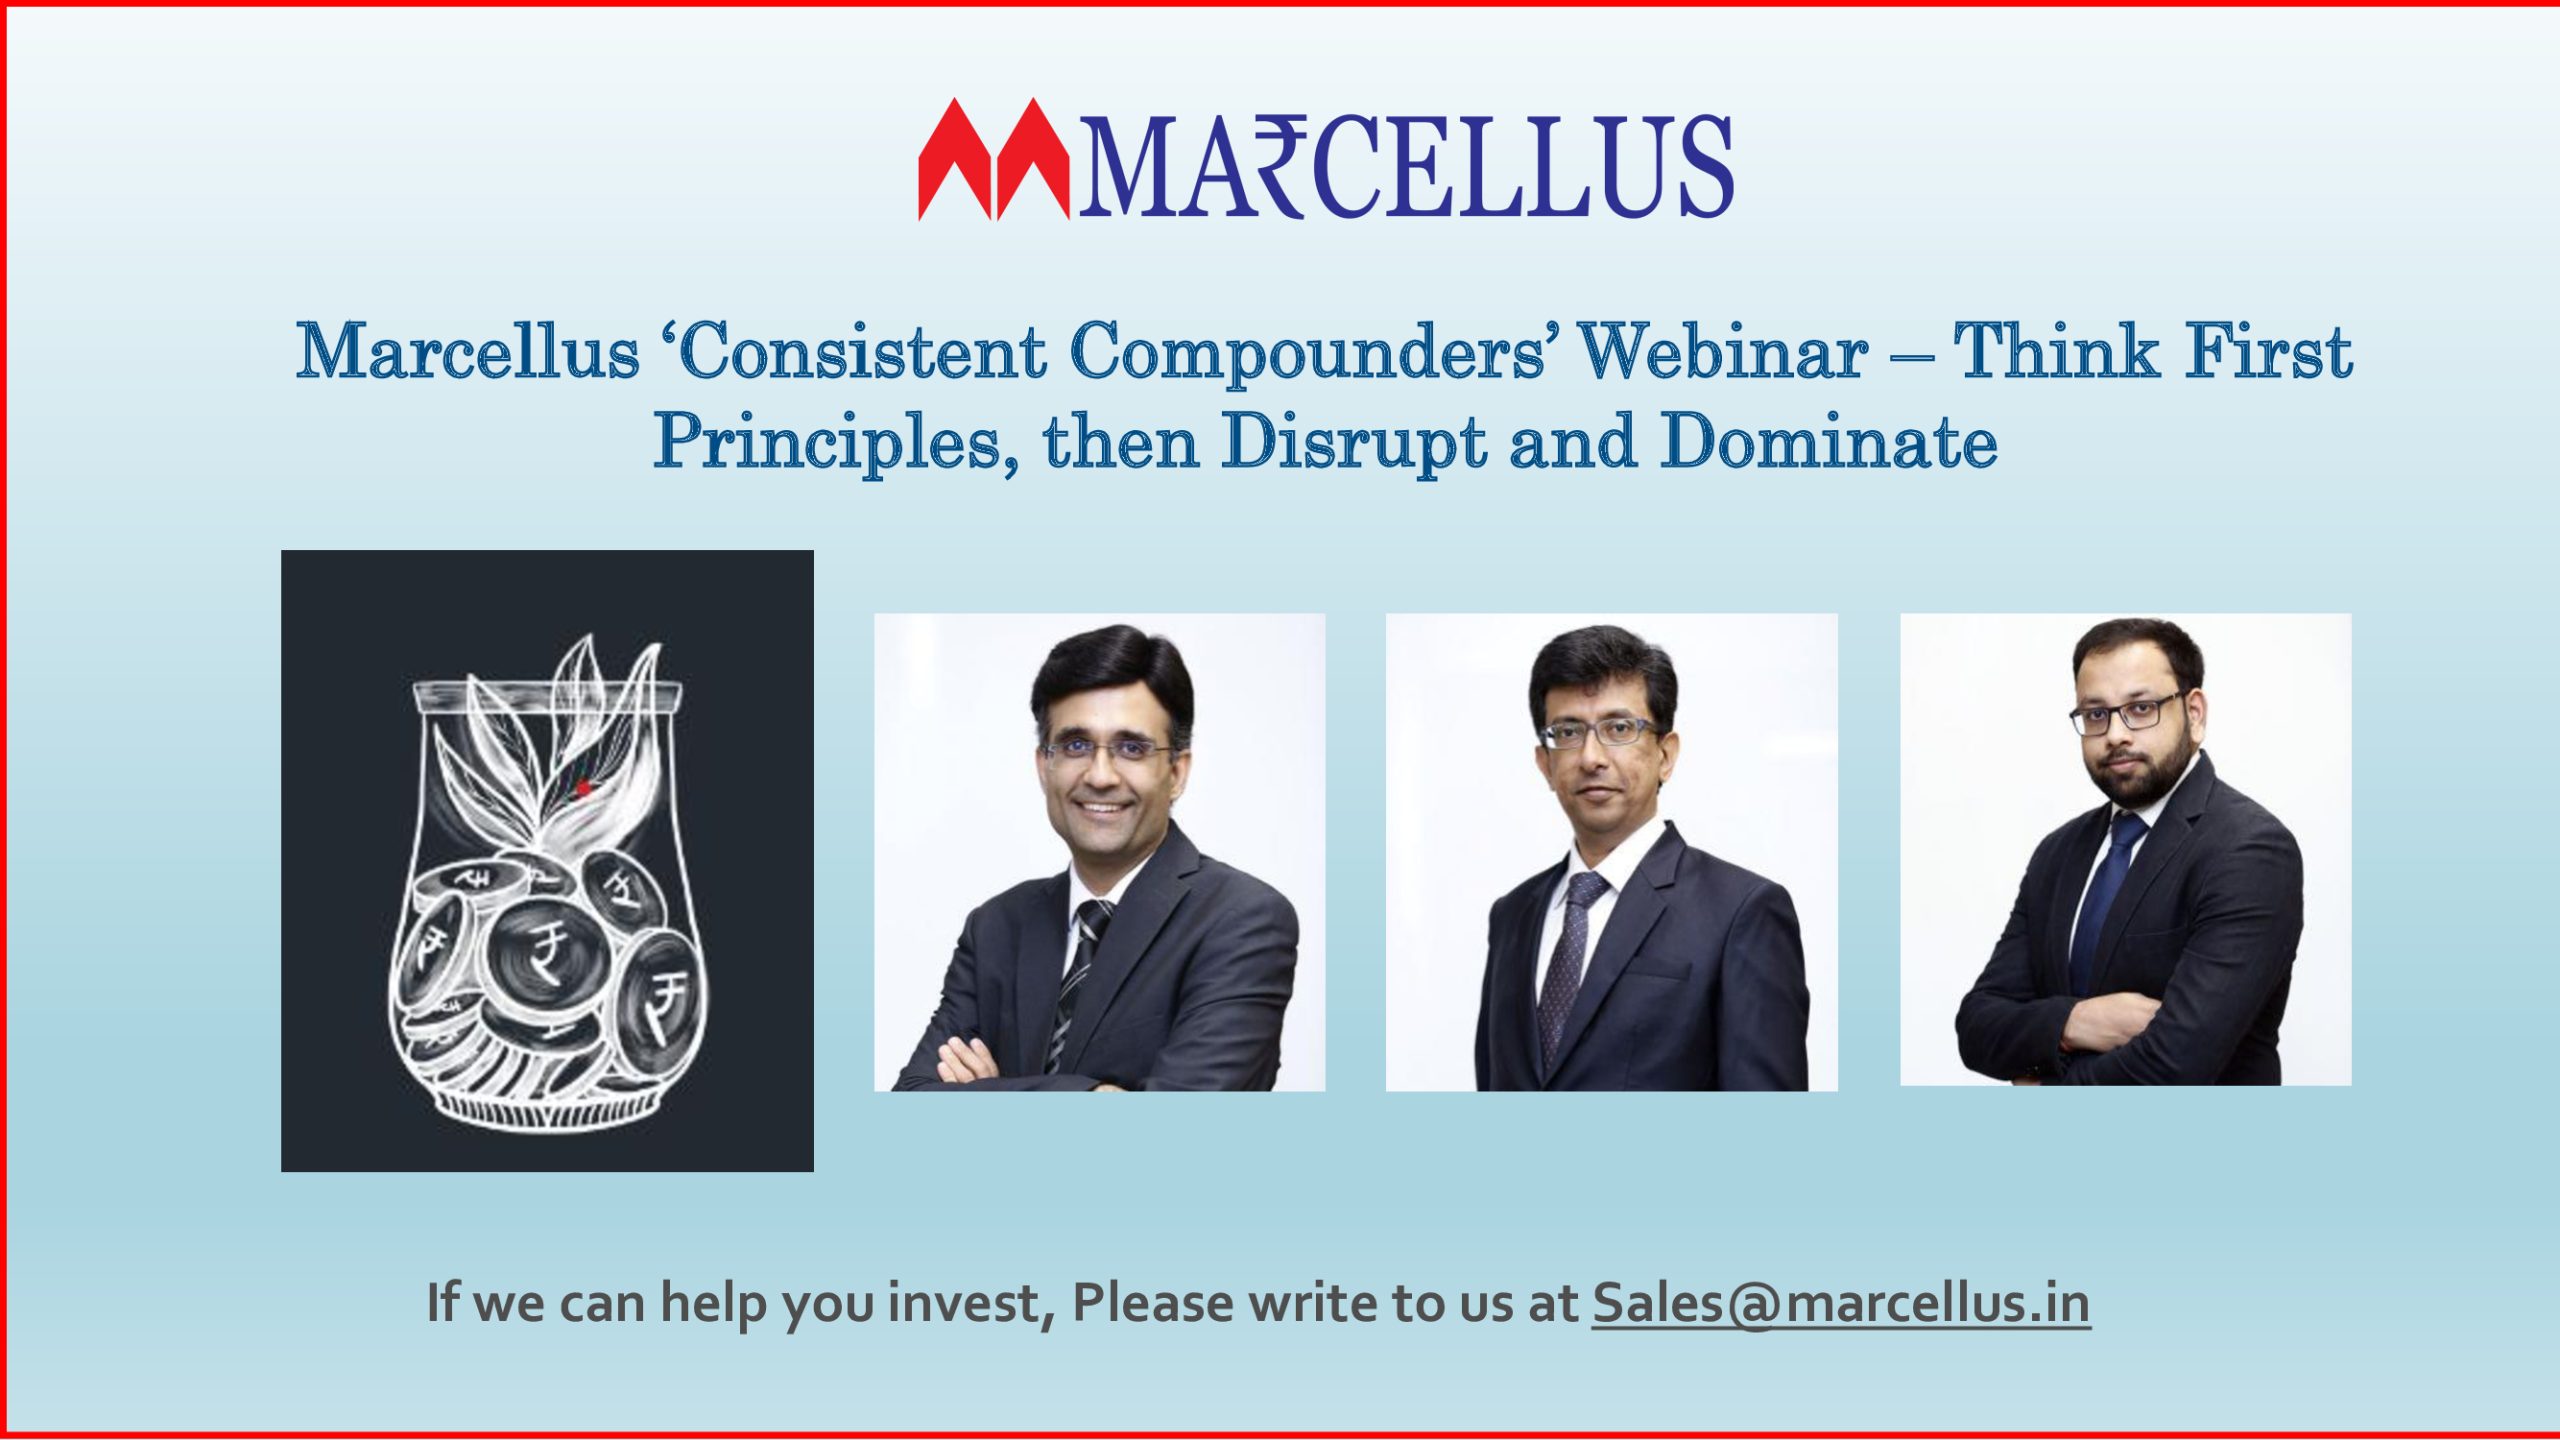 Marcellus Consistent Compounders Portfolio Webinar on Thinking the First Principles, then Disrupt and Dominate the market